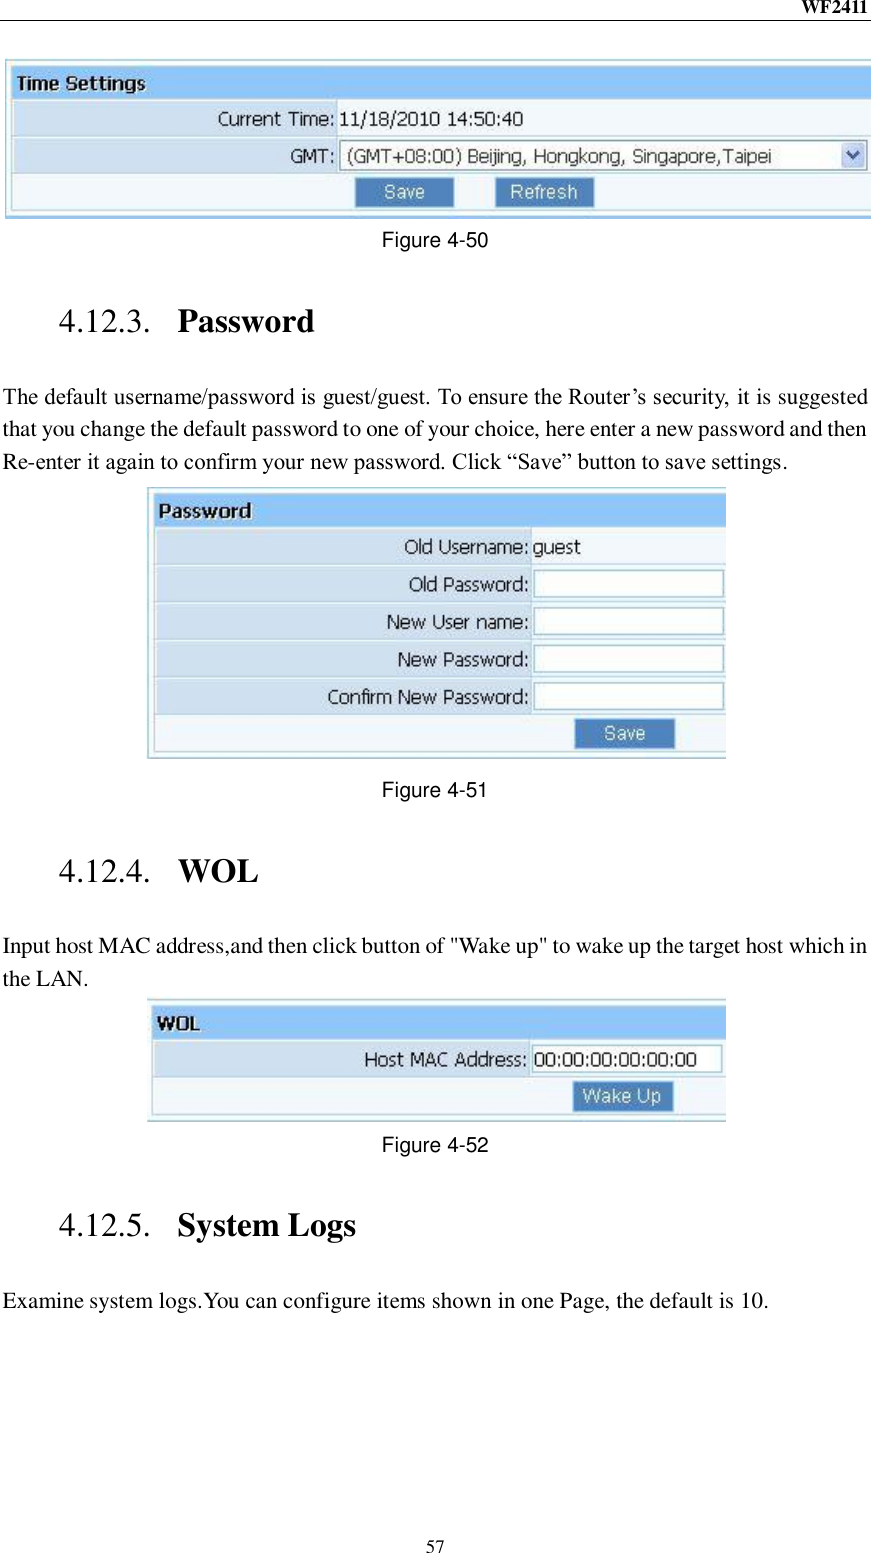 WF2411  57  Figure 4-50 4.12.3. Password The default username/password is guest/guest. To ensure the Router‟s security, it is suggested that you change the default password to one of your choice, here enter a new password and then Re-enter it again to confirm your new password. Click “Save” button to save settings.  Figure 4-51 4.12.4. WOL Input host MAC address,and then click button of &quot;Wake up&quot; to wake up the target host which in the LAN.  Figure 4-52 4.12.5. System Logs Examine system logs.You can configure items shown in one Page, the default is 10. 